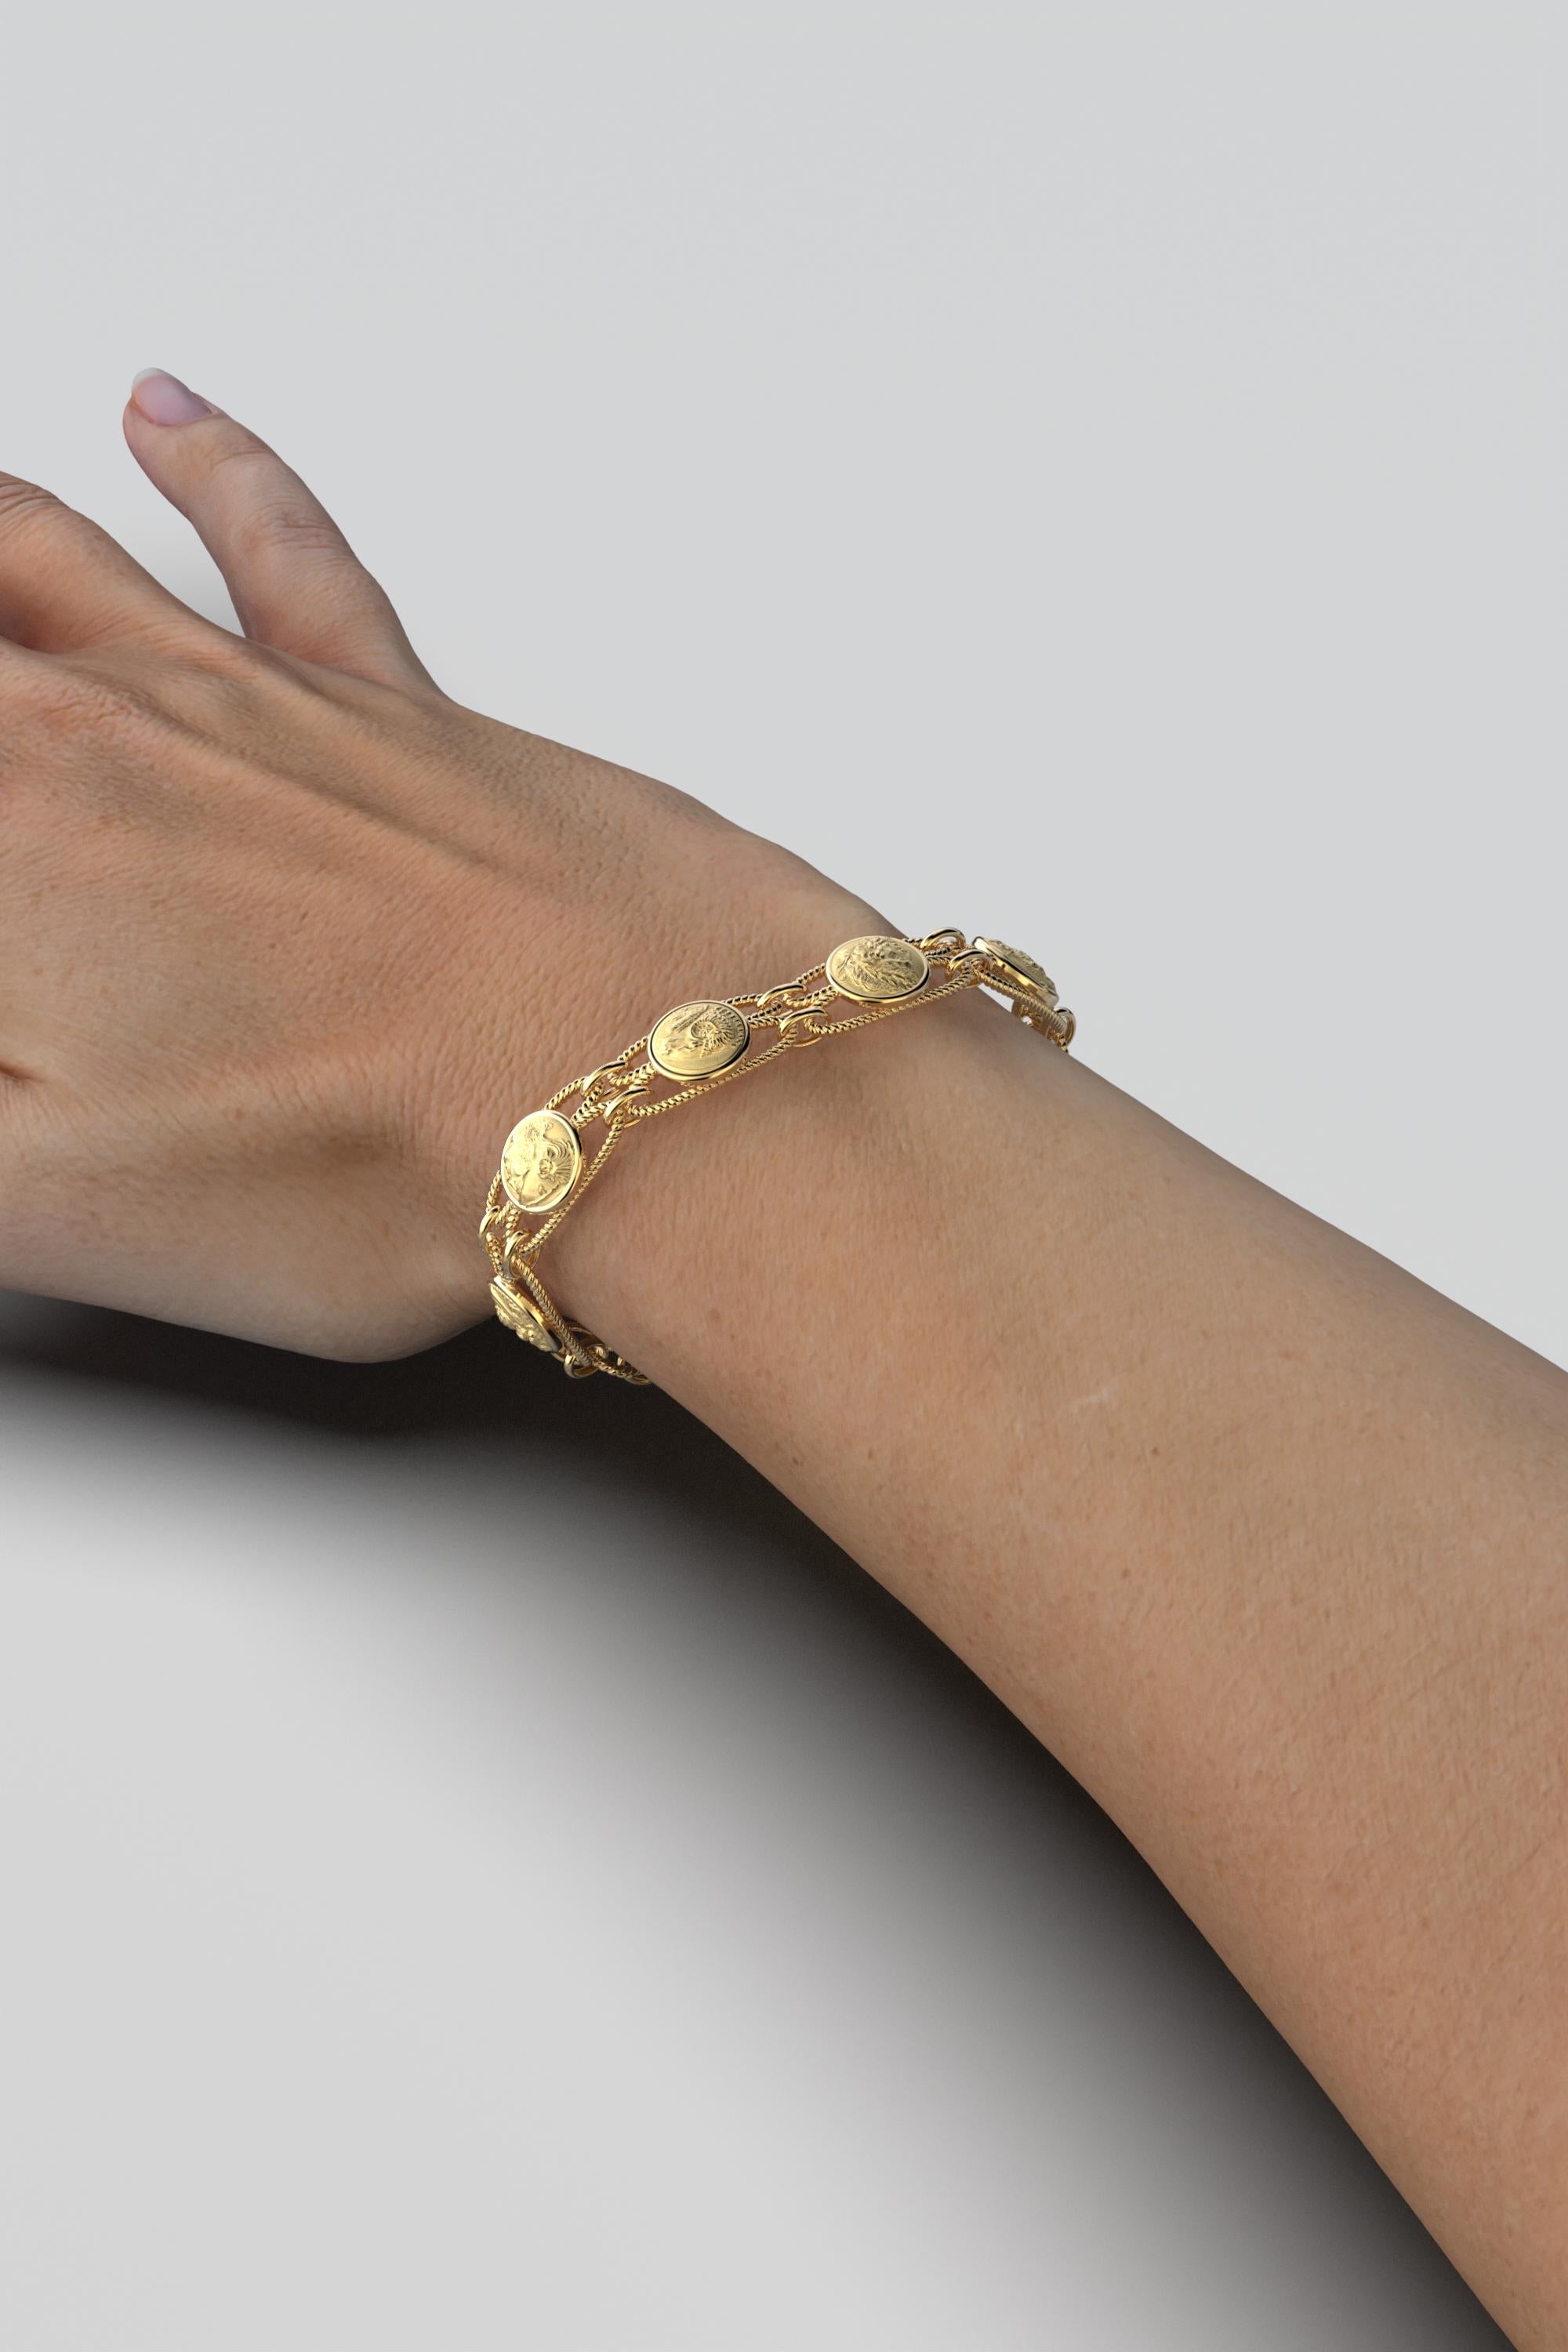 Classical Greek Italian Bracelet in 14k Gold Made in Italy by Oltremare Gioielli, Greek Style For Sale